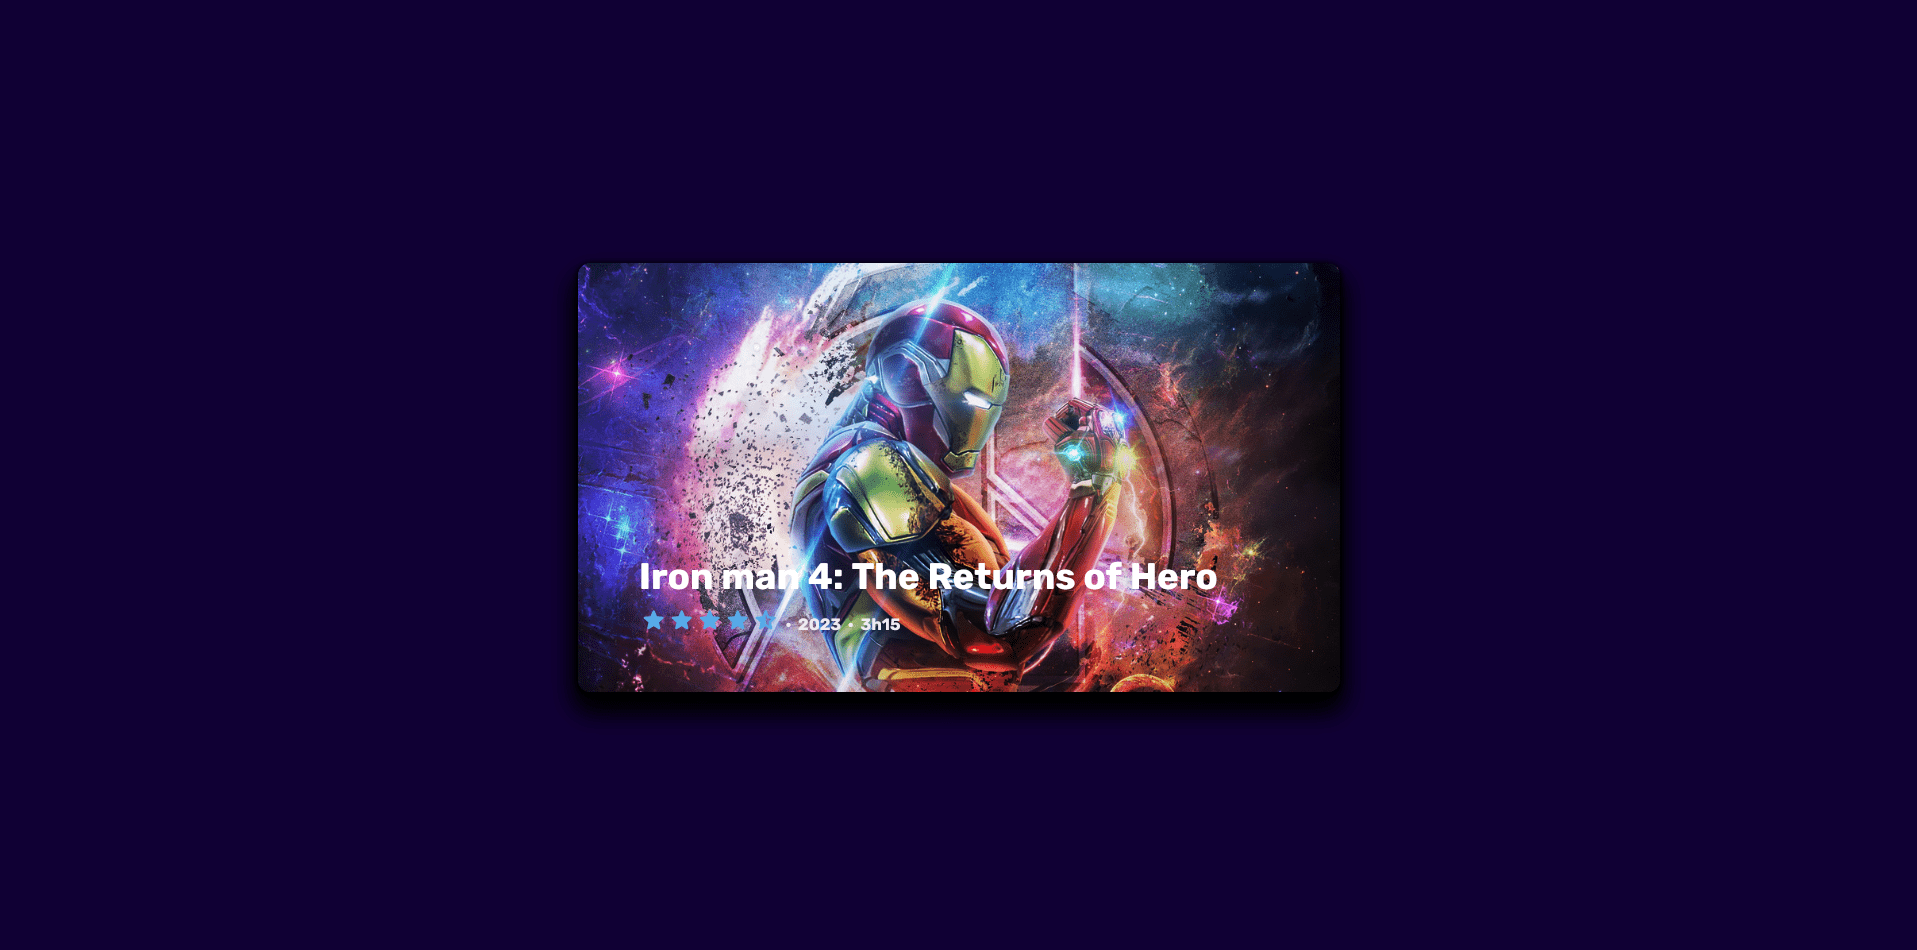 Iron man 4: The Returns of Hero Movie Card With Hover Effect Using HTML And CSS